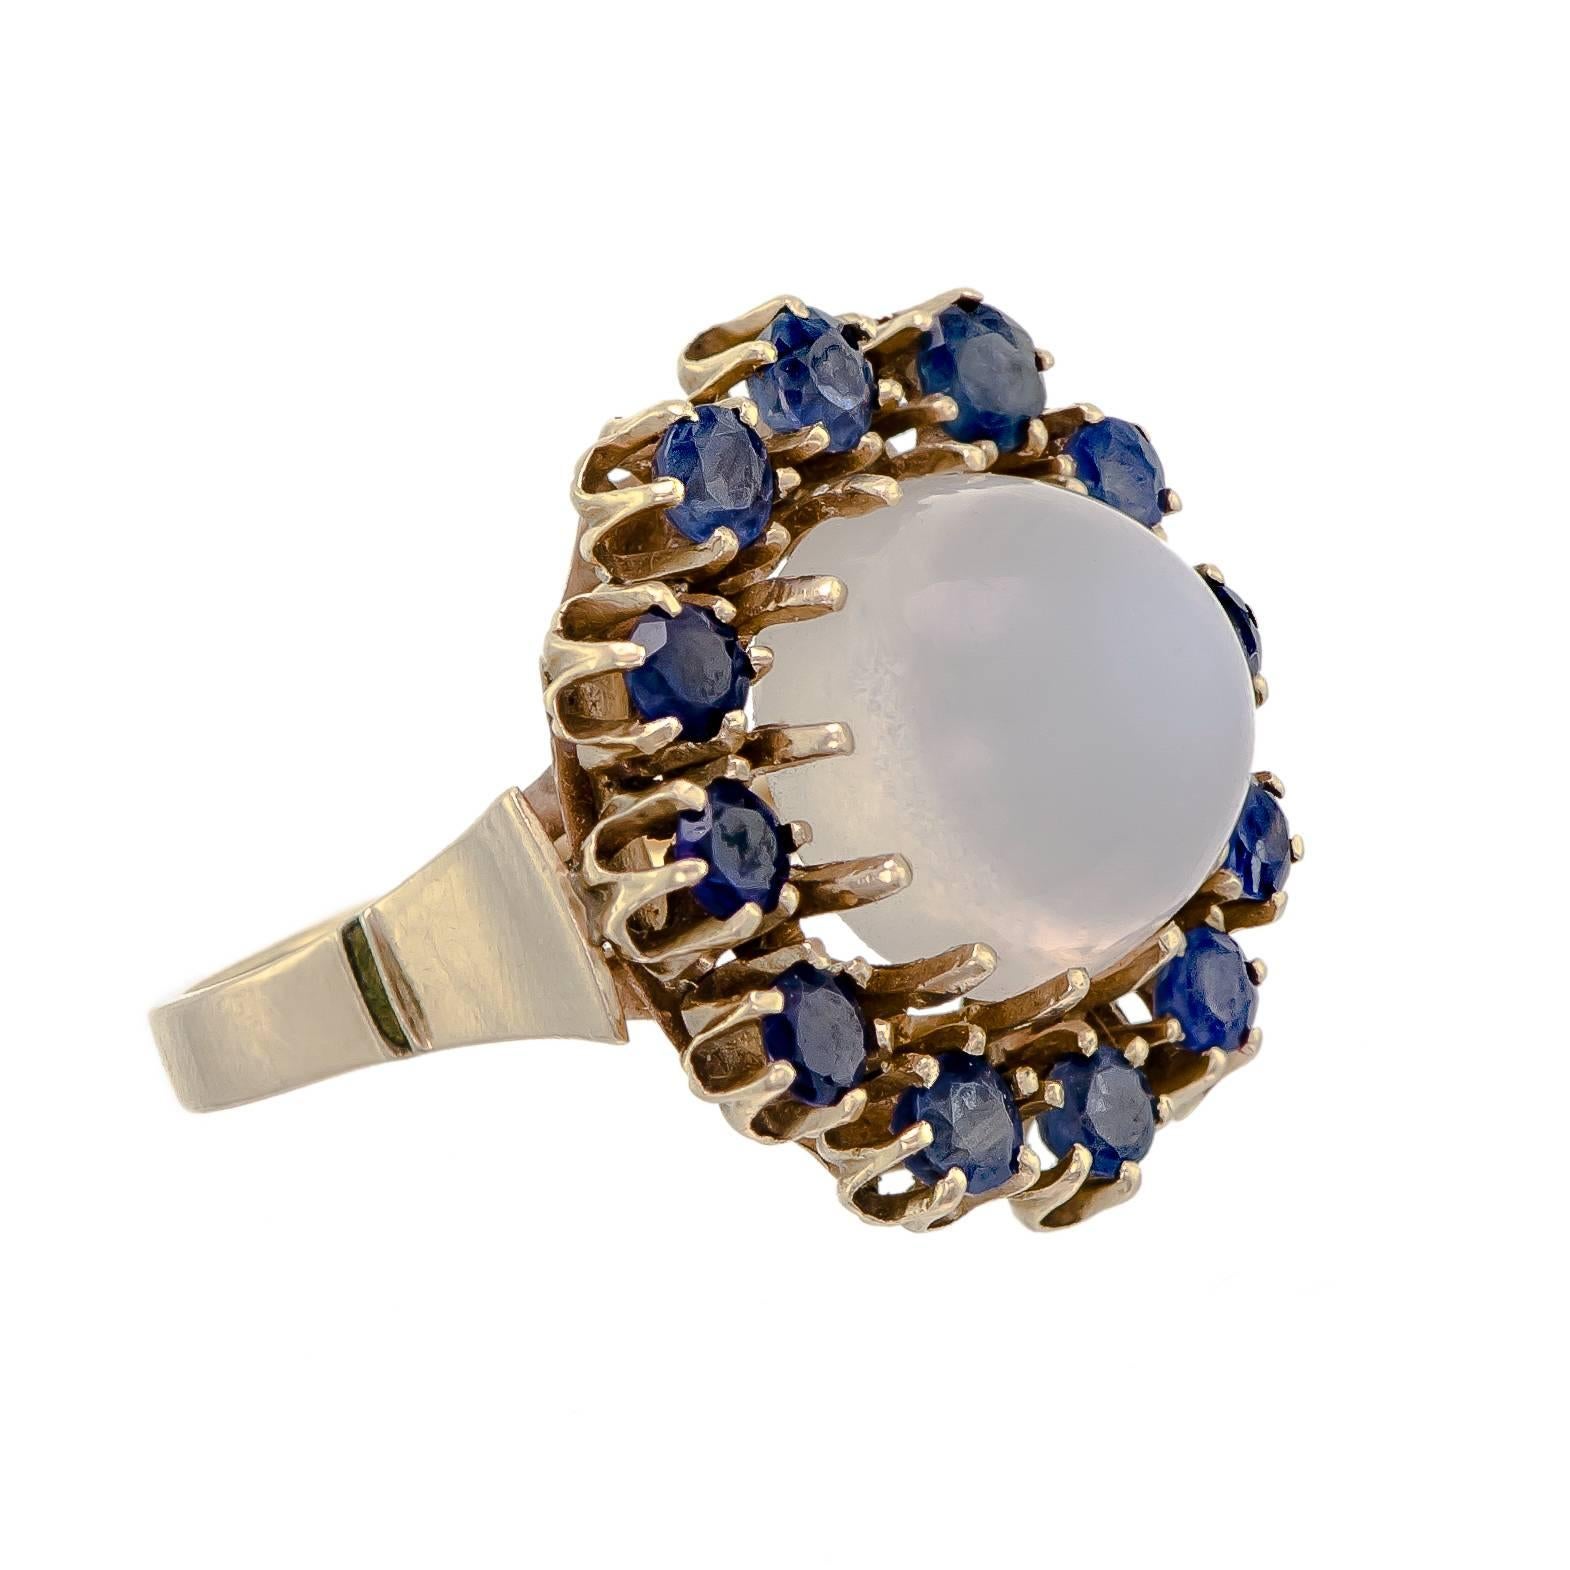 Wonderful Vintage estate cocktail ring glamorous in details moonstone and sapphire 14k yellow gold ring centrally set with one large white moonstone cabochon surrounded by twelve (12) prong set round brilliant cut deep blue sapphires - 14k mount -